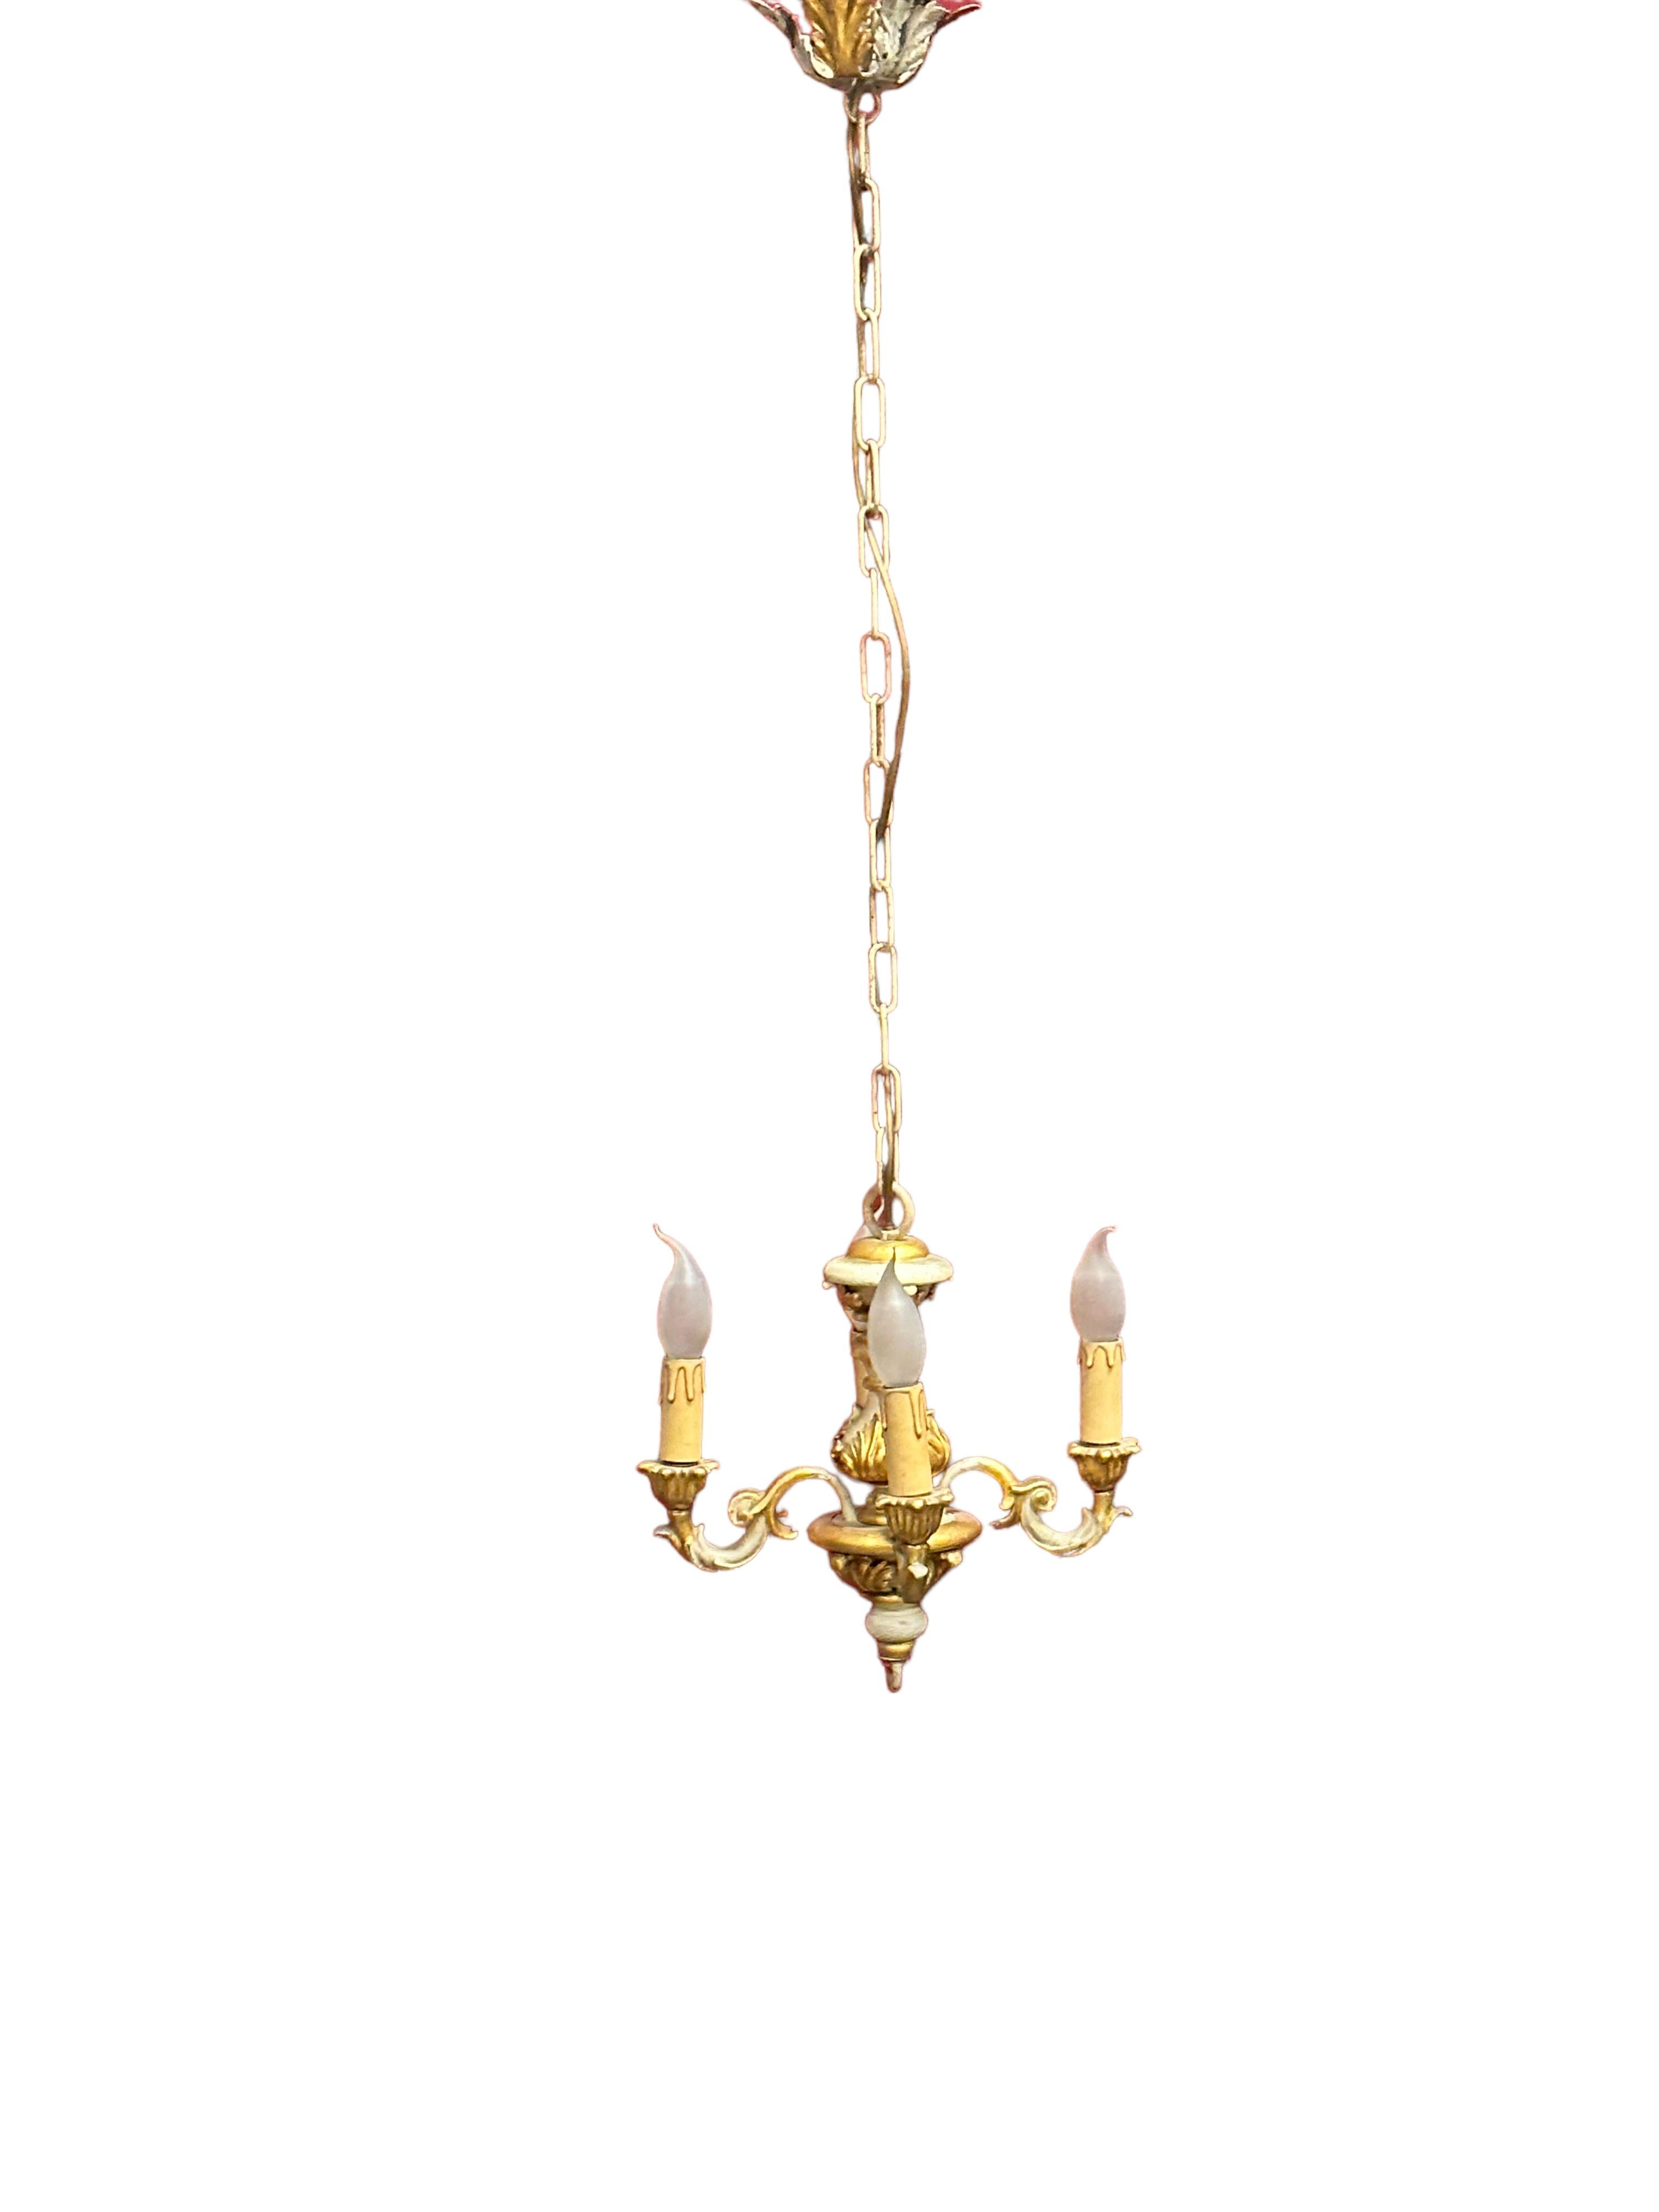 Four Light Cream White & Gilt wood Hollywood Regency Chandelier Tole, Austria In Good Condition For Sale In Nuernberg, DE